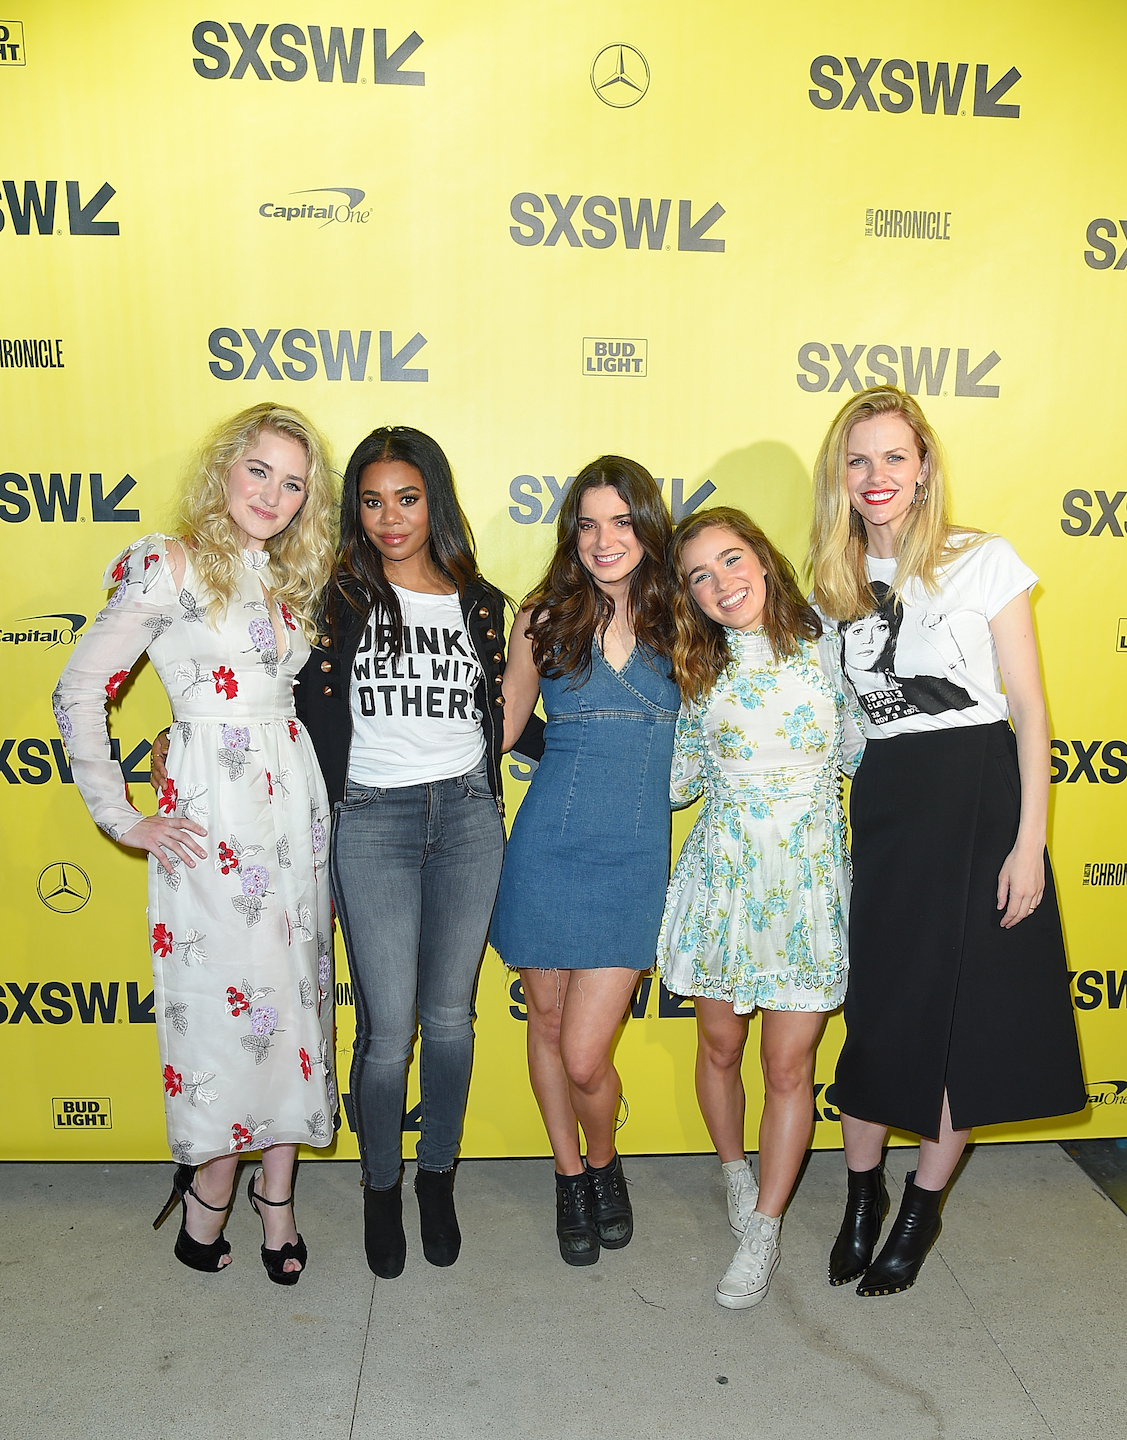 (L-R) AJ Michalka, Regina Hall, Dylan Gelula, Haley Lu Richardson, and Brooklyn Decker at the Support The Girls World Premiere. Photo by Michael Loccisano/Getty Images for SXSW